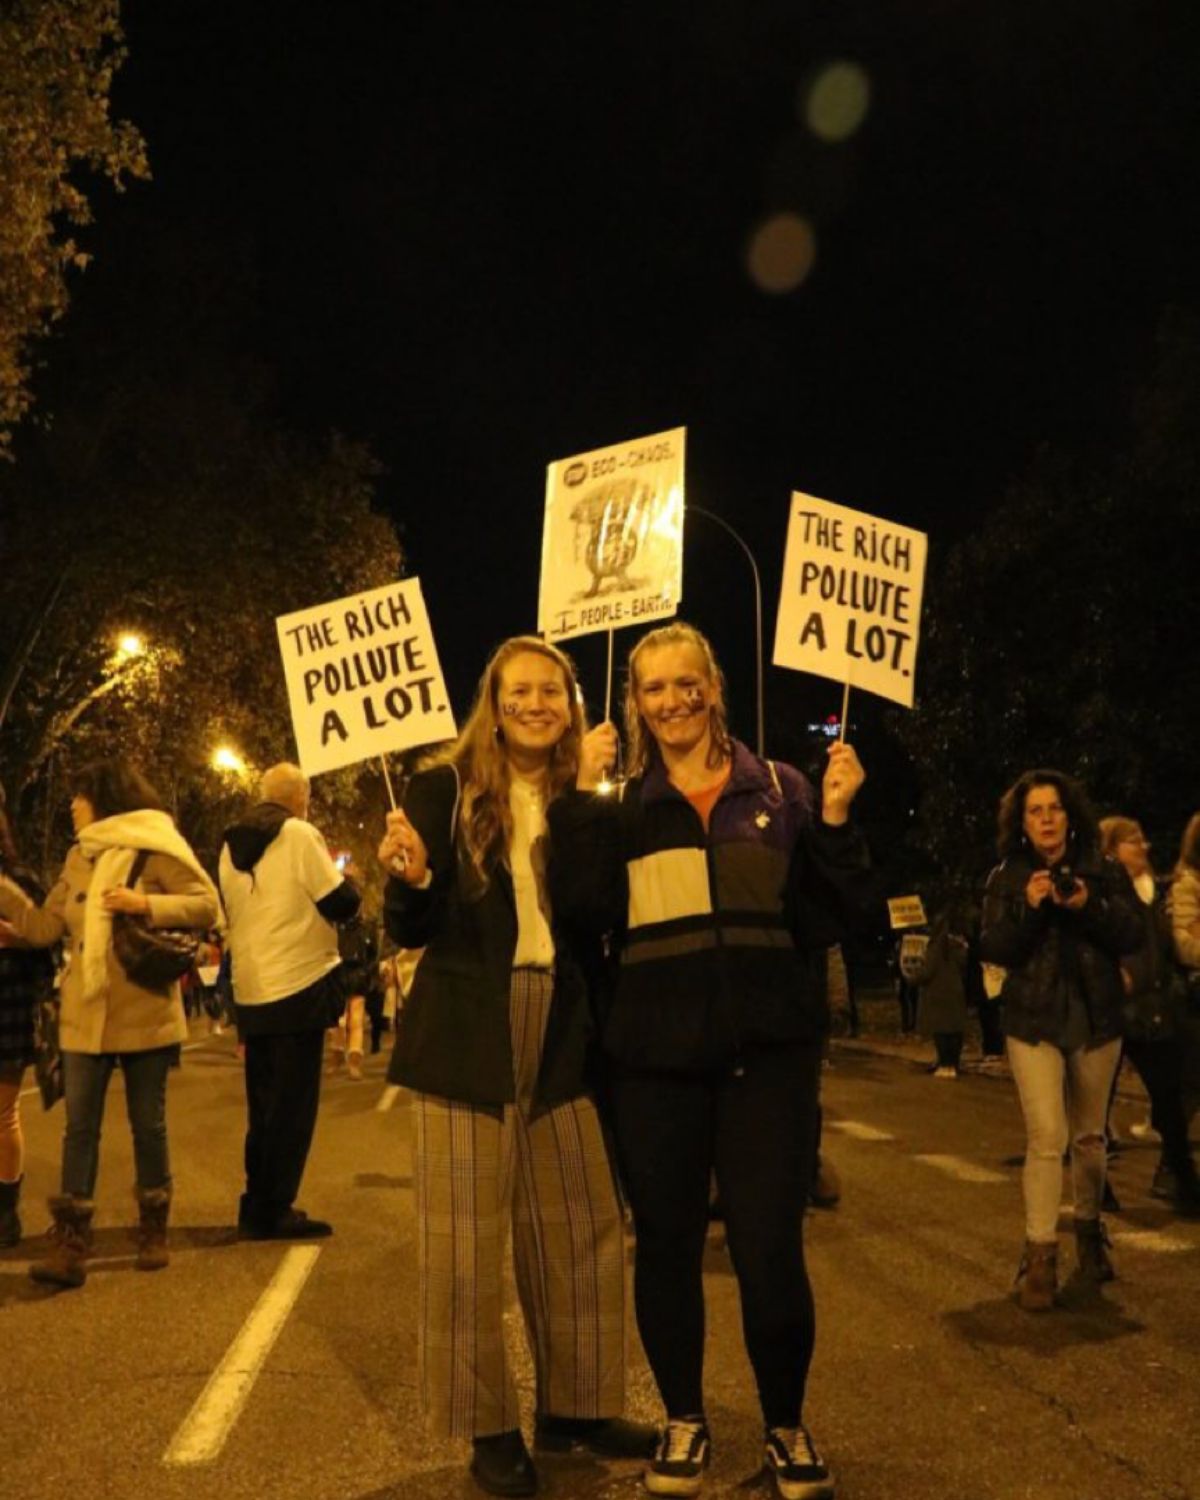 The author and a friend at a climate protest.